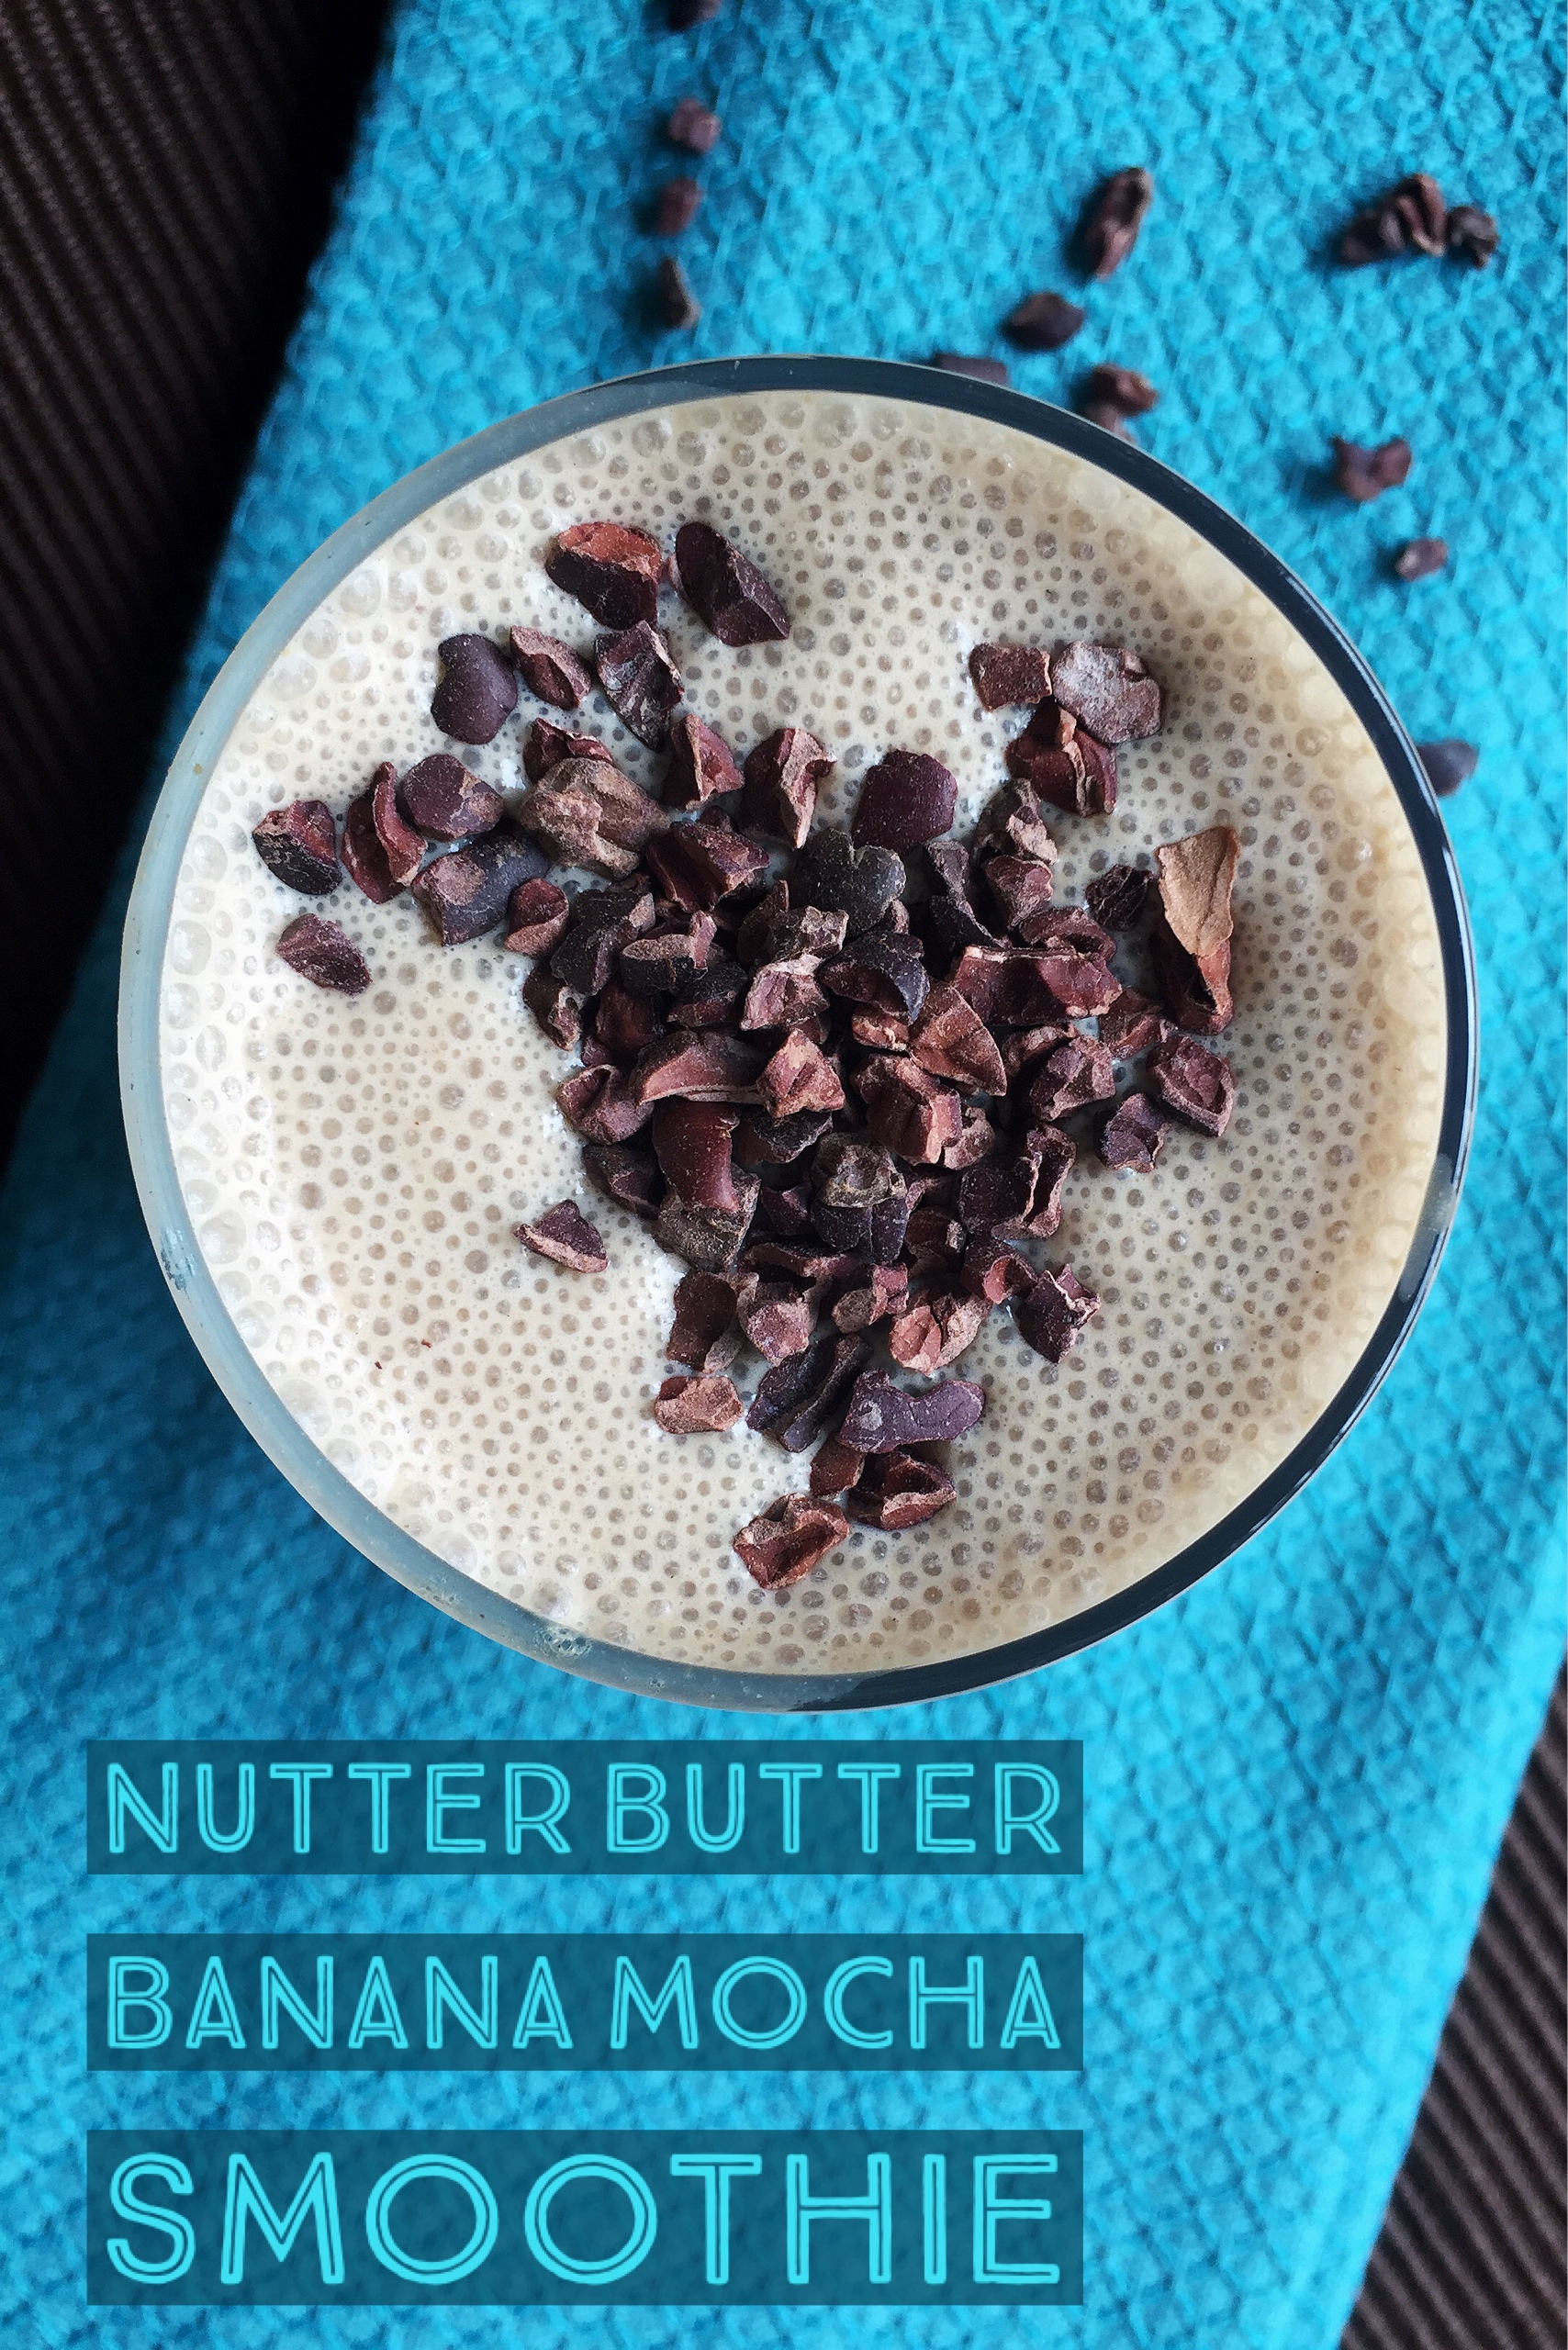 Better For You Mornings With Tasty Peanut Butter And Greek Yogurt Smoothies! © www.roastedbeanz.com #MySmoothie [AD] #CollectiveBias #shop